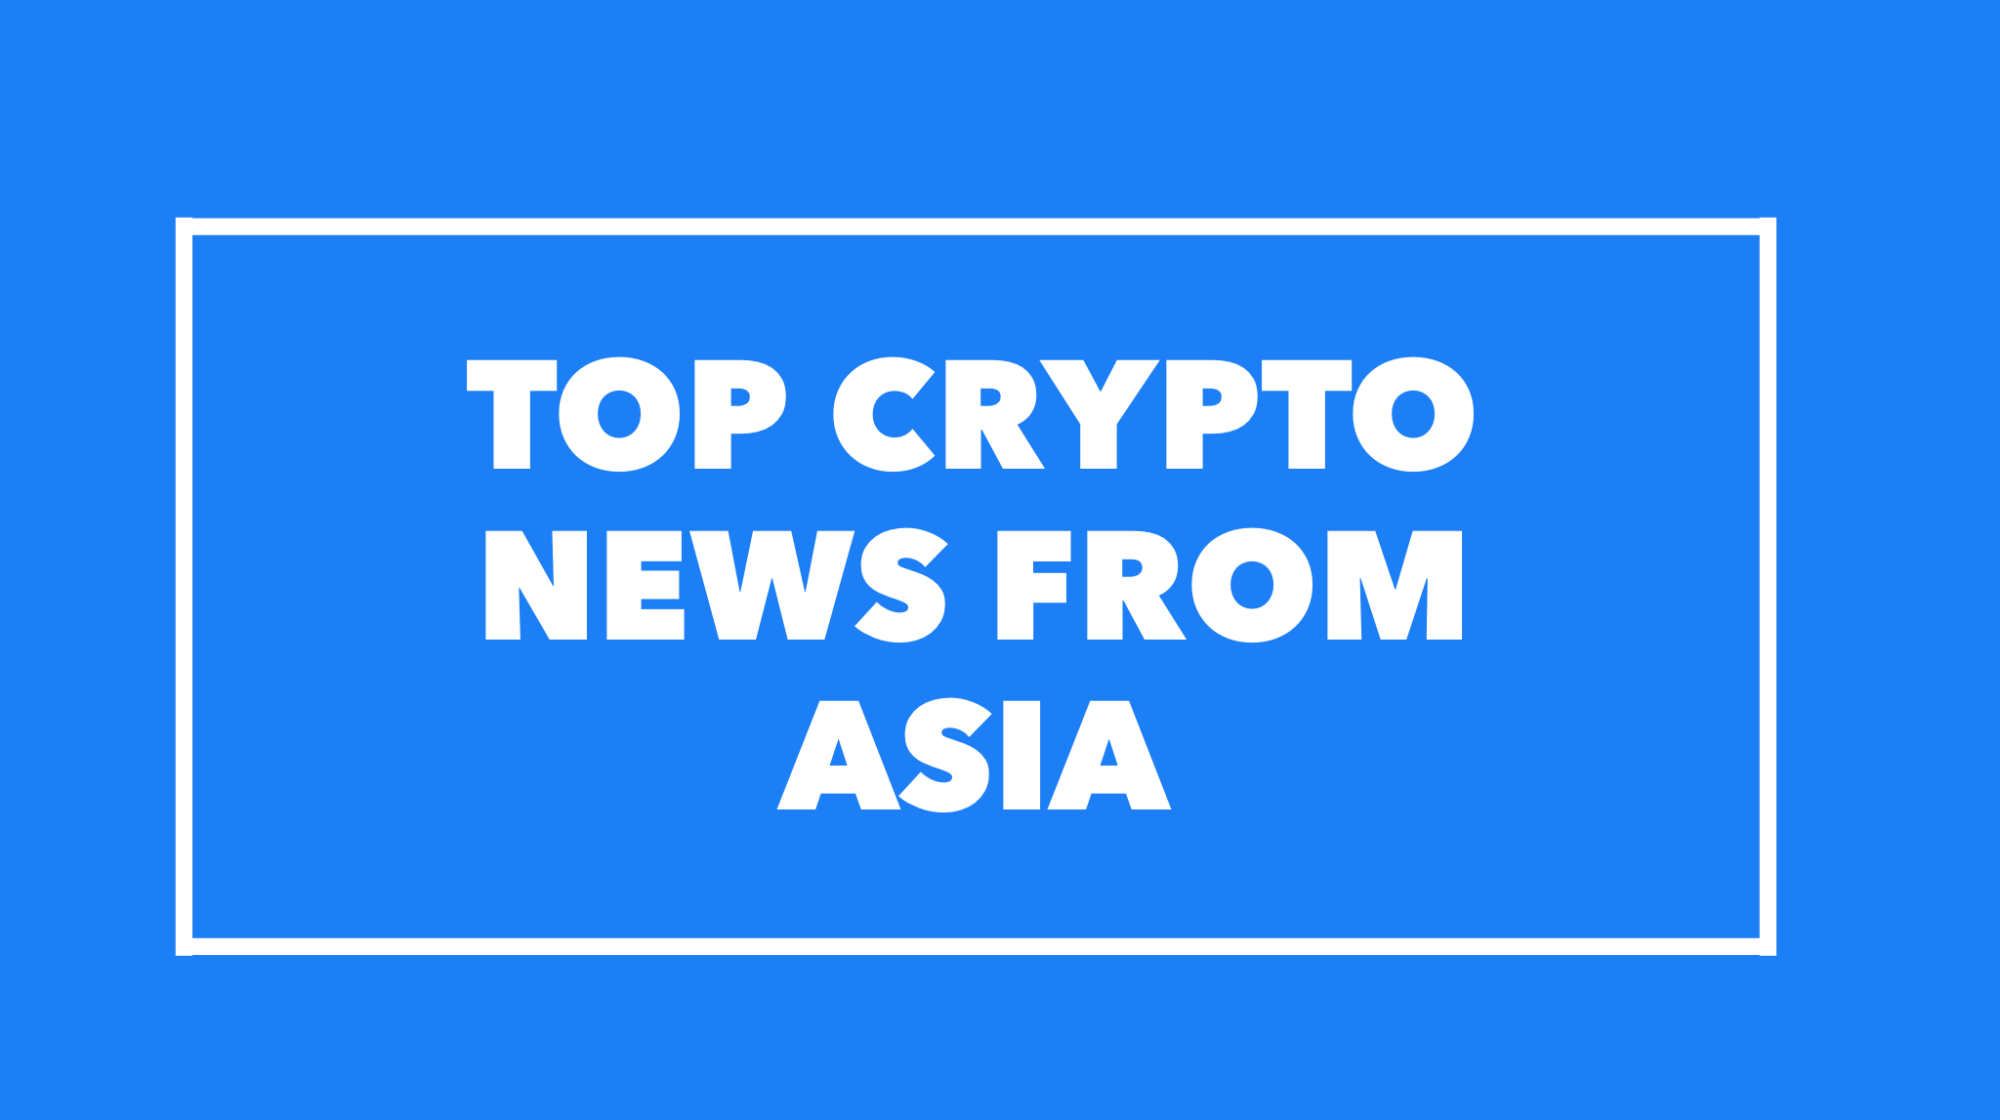 Top Crypto News in Asia from July 22- July 25th